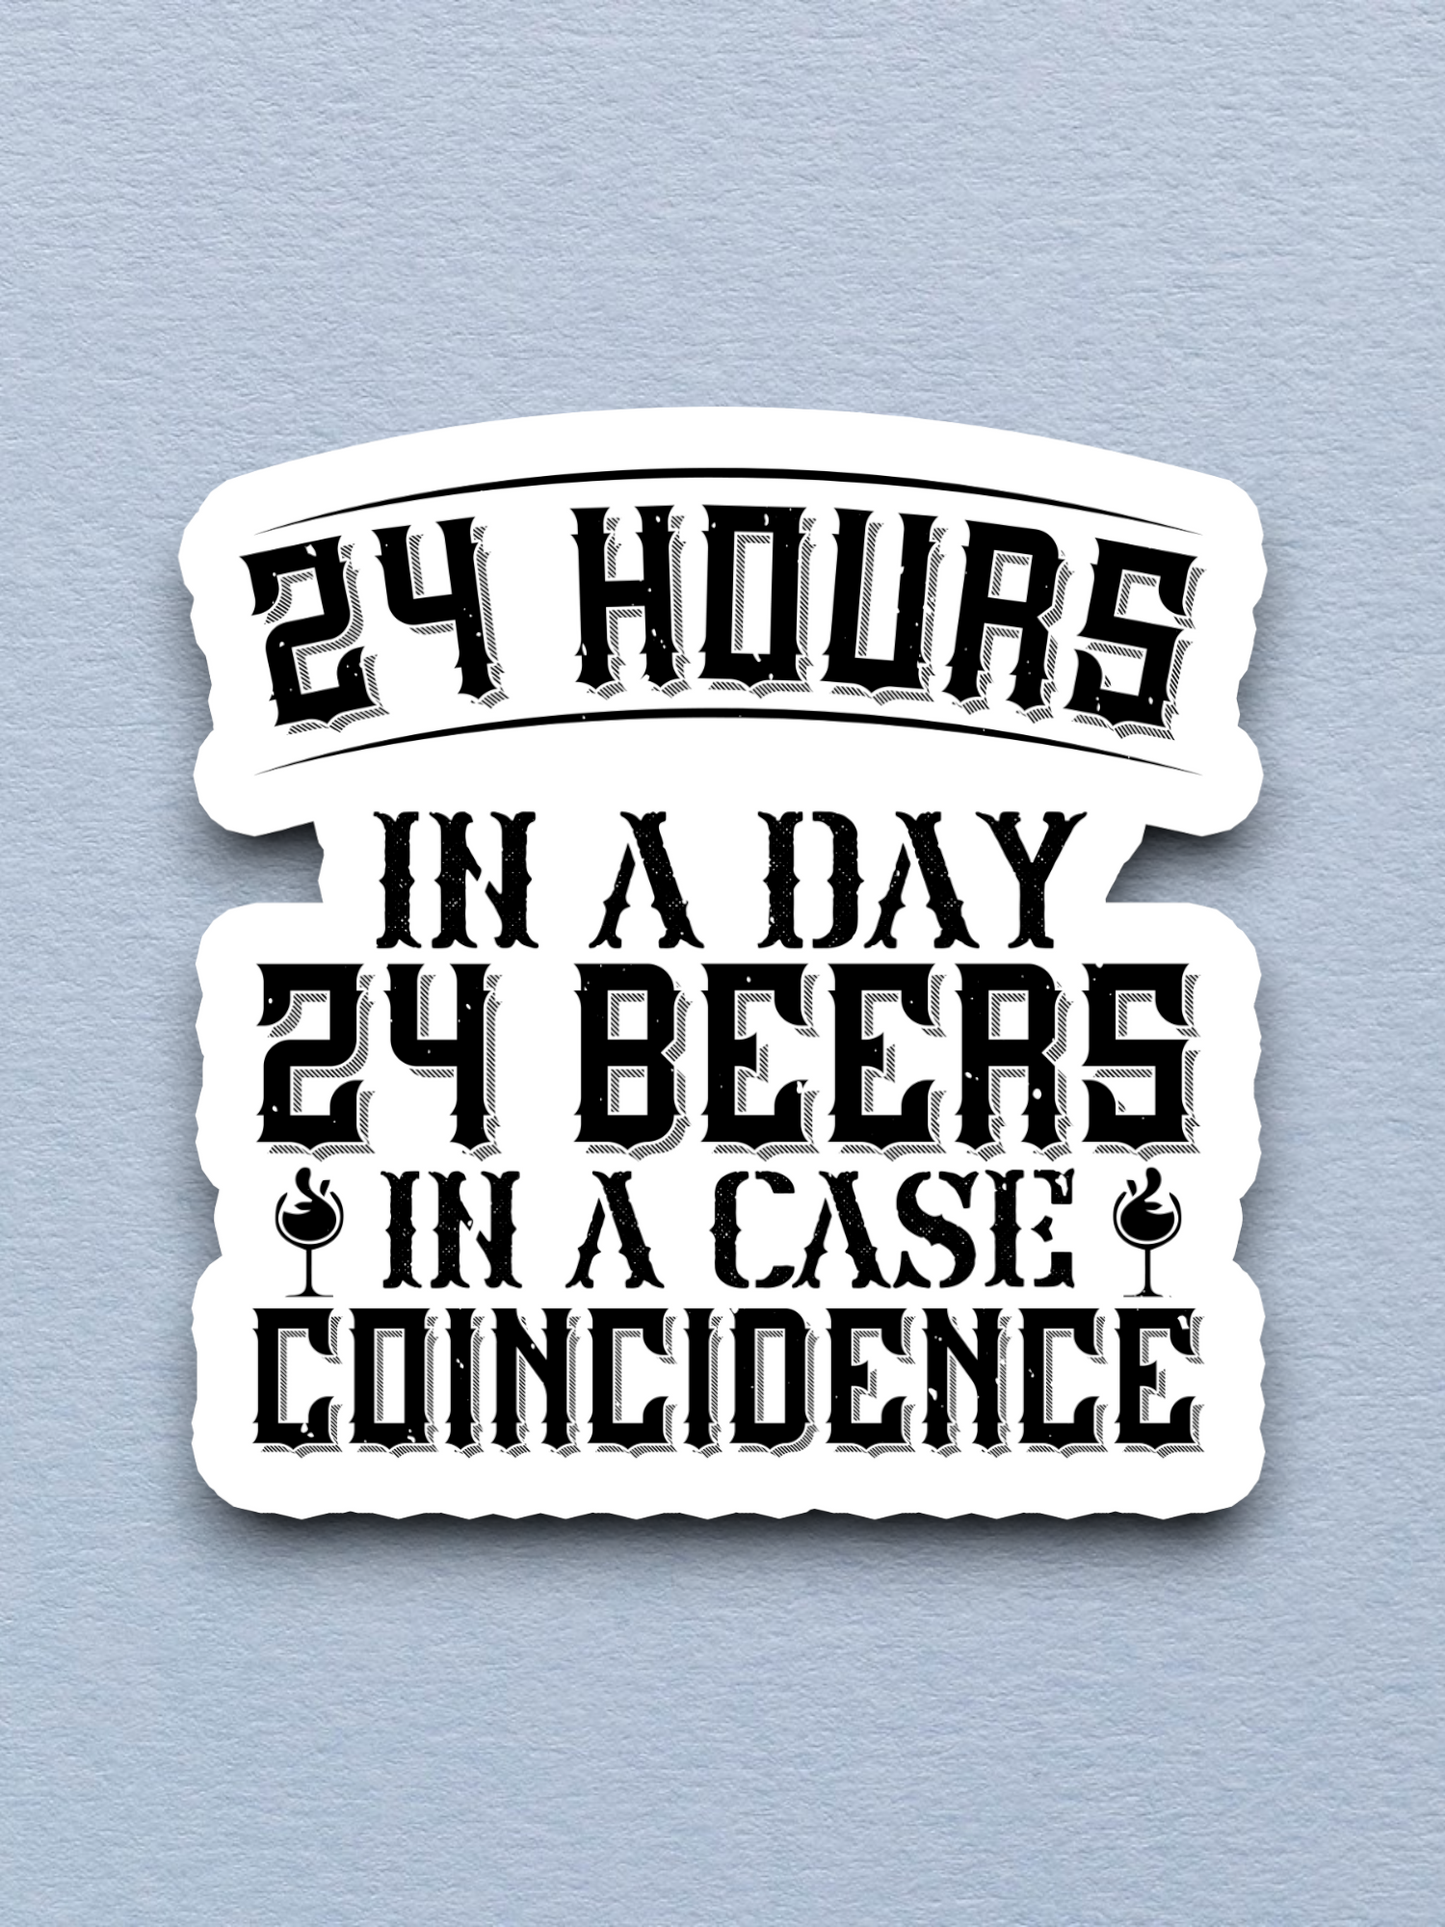 24 Hours in a Day 24 Beers in a Case Coincidence Sticker